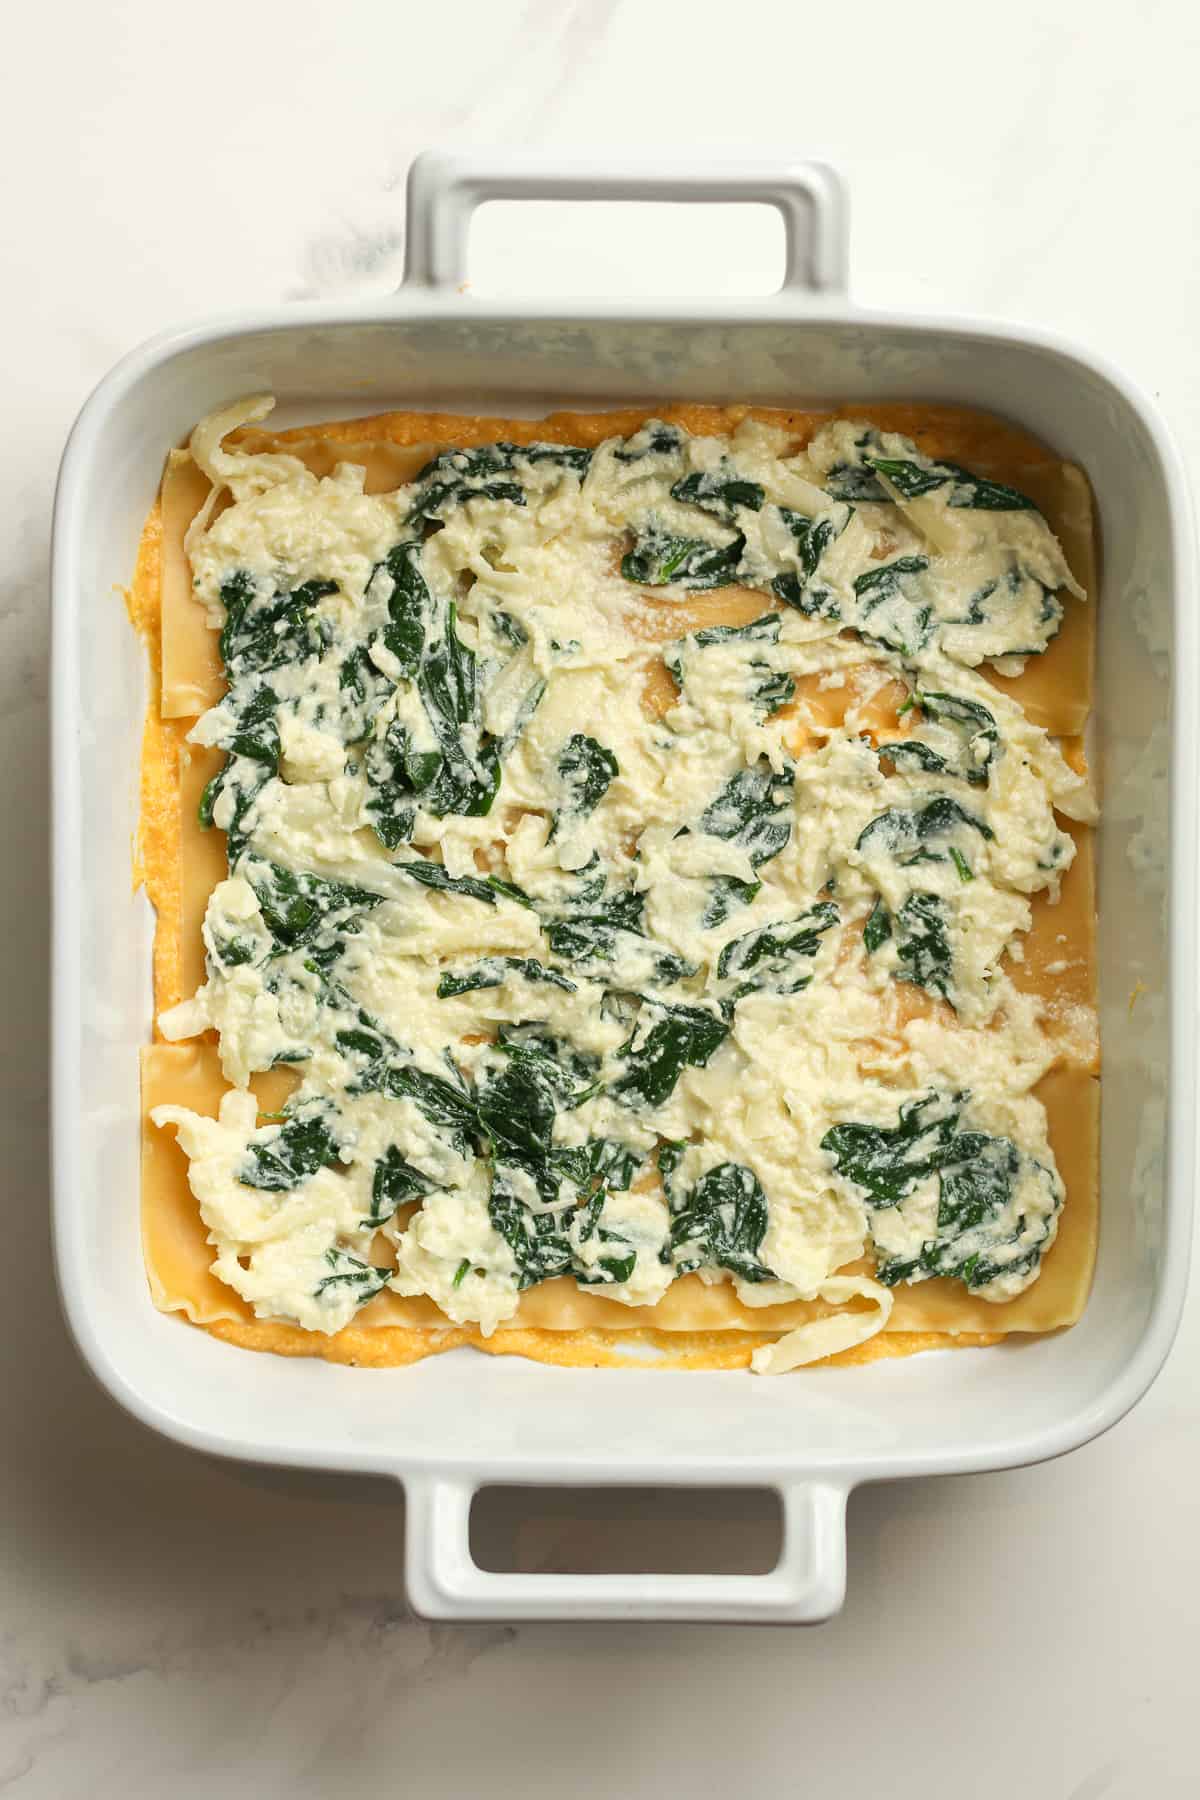 The dish with the cheese and spinach layer.